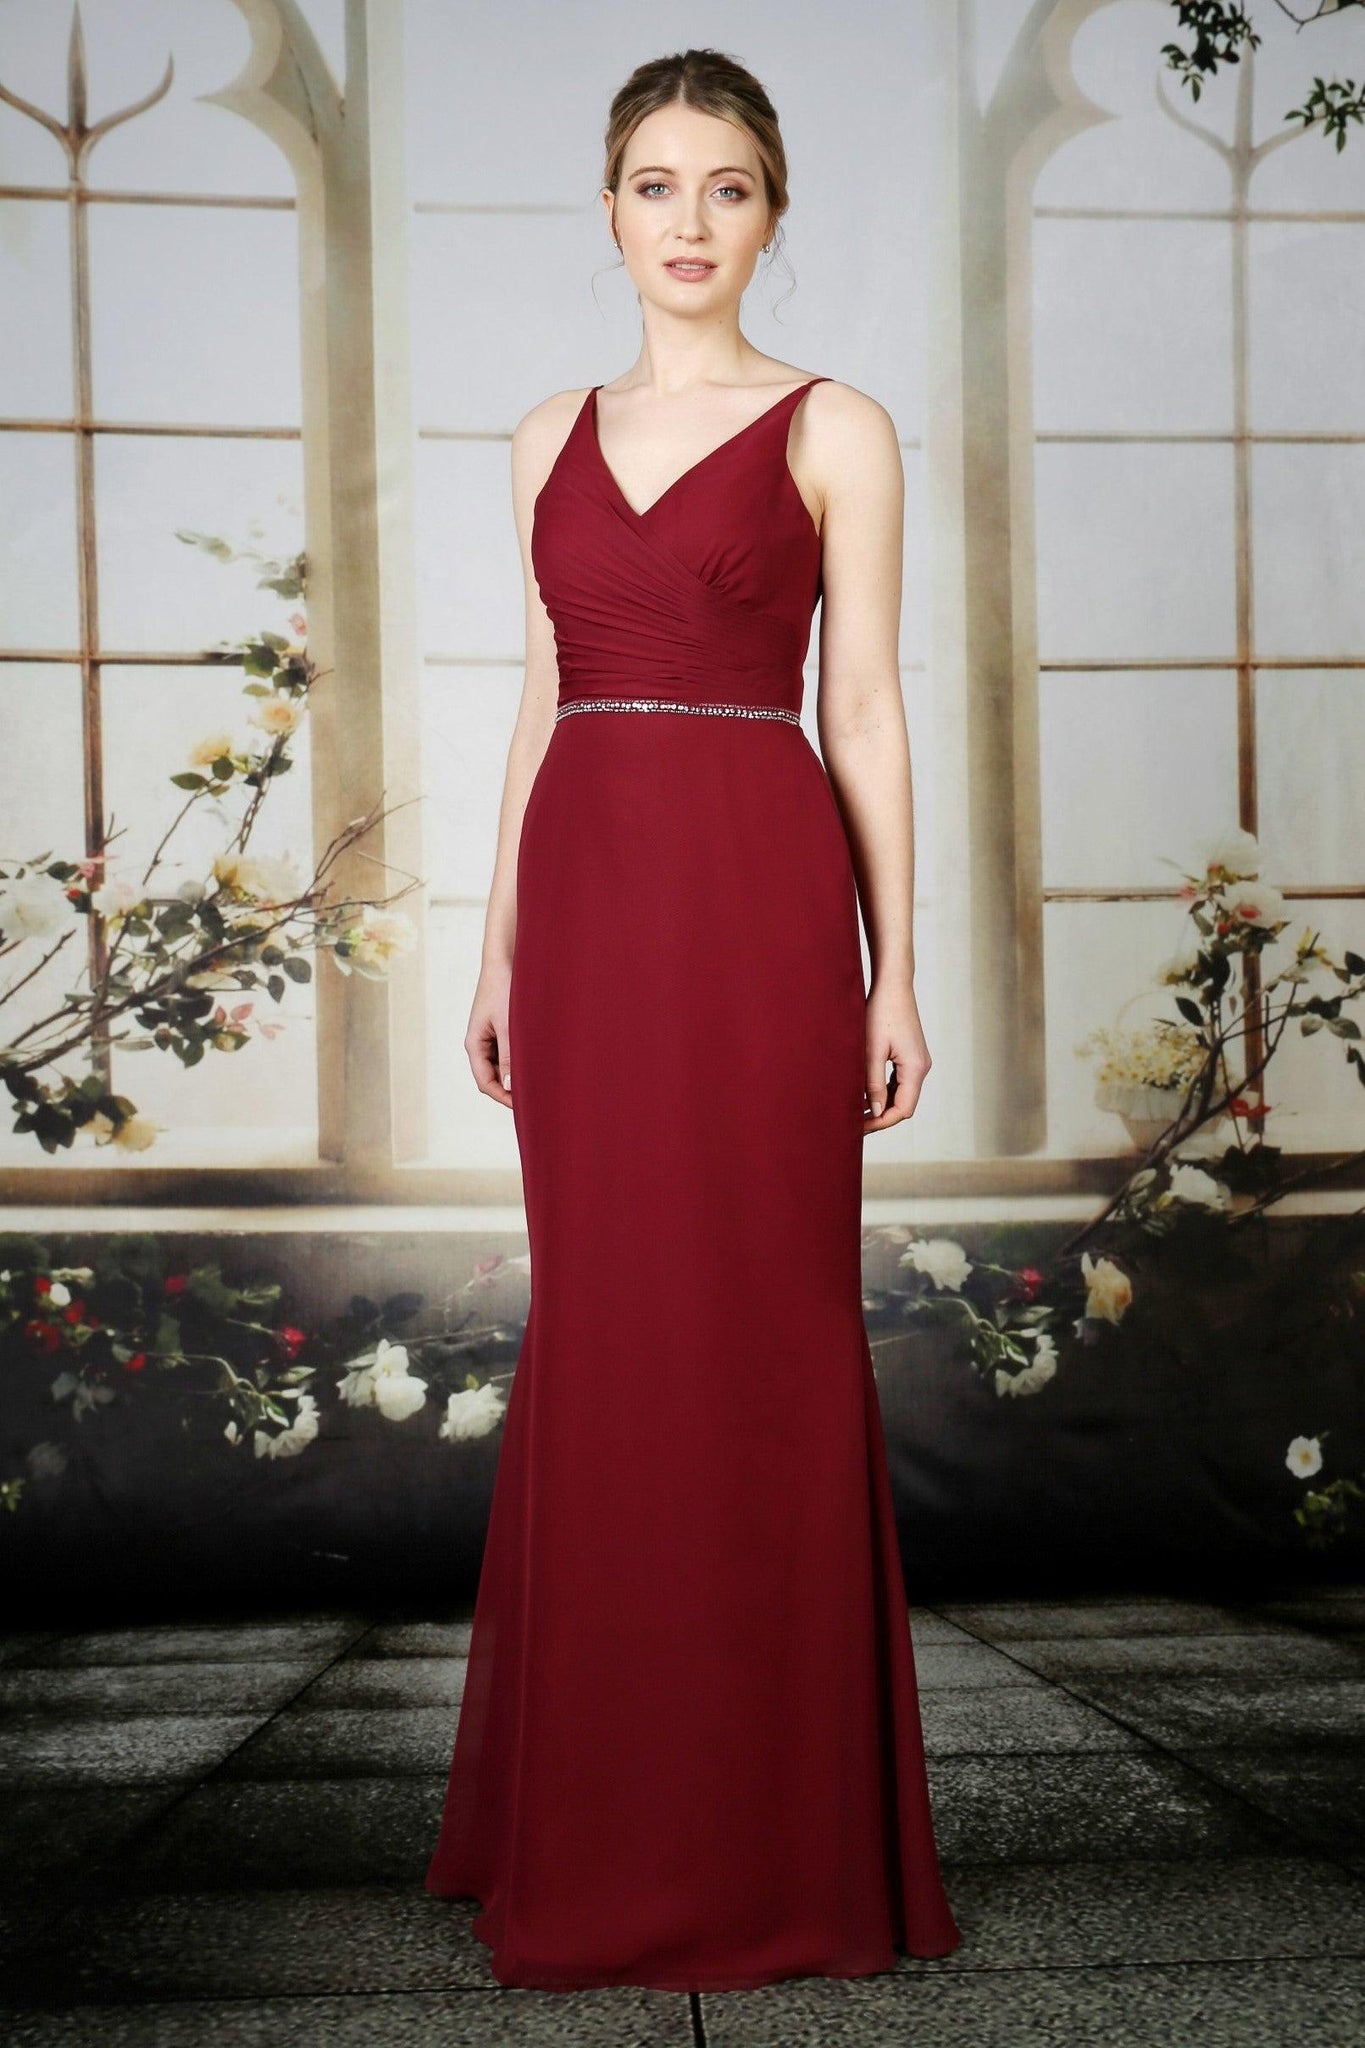 CHELSEA - Nieve Occasion - Adore Bridal and Occasion Wear